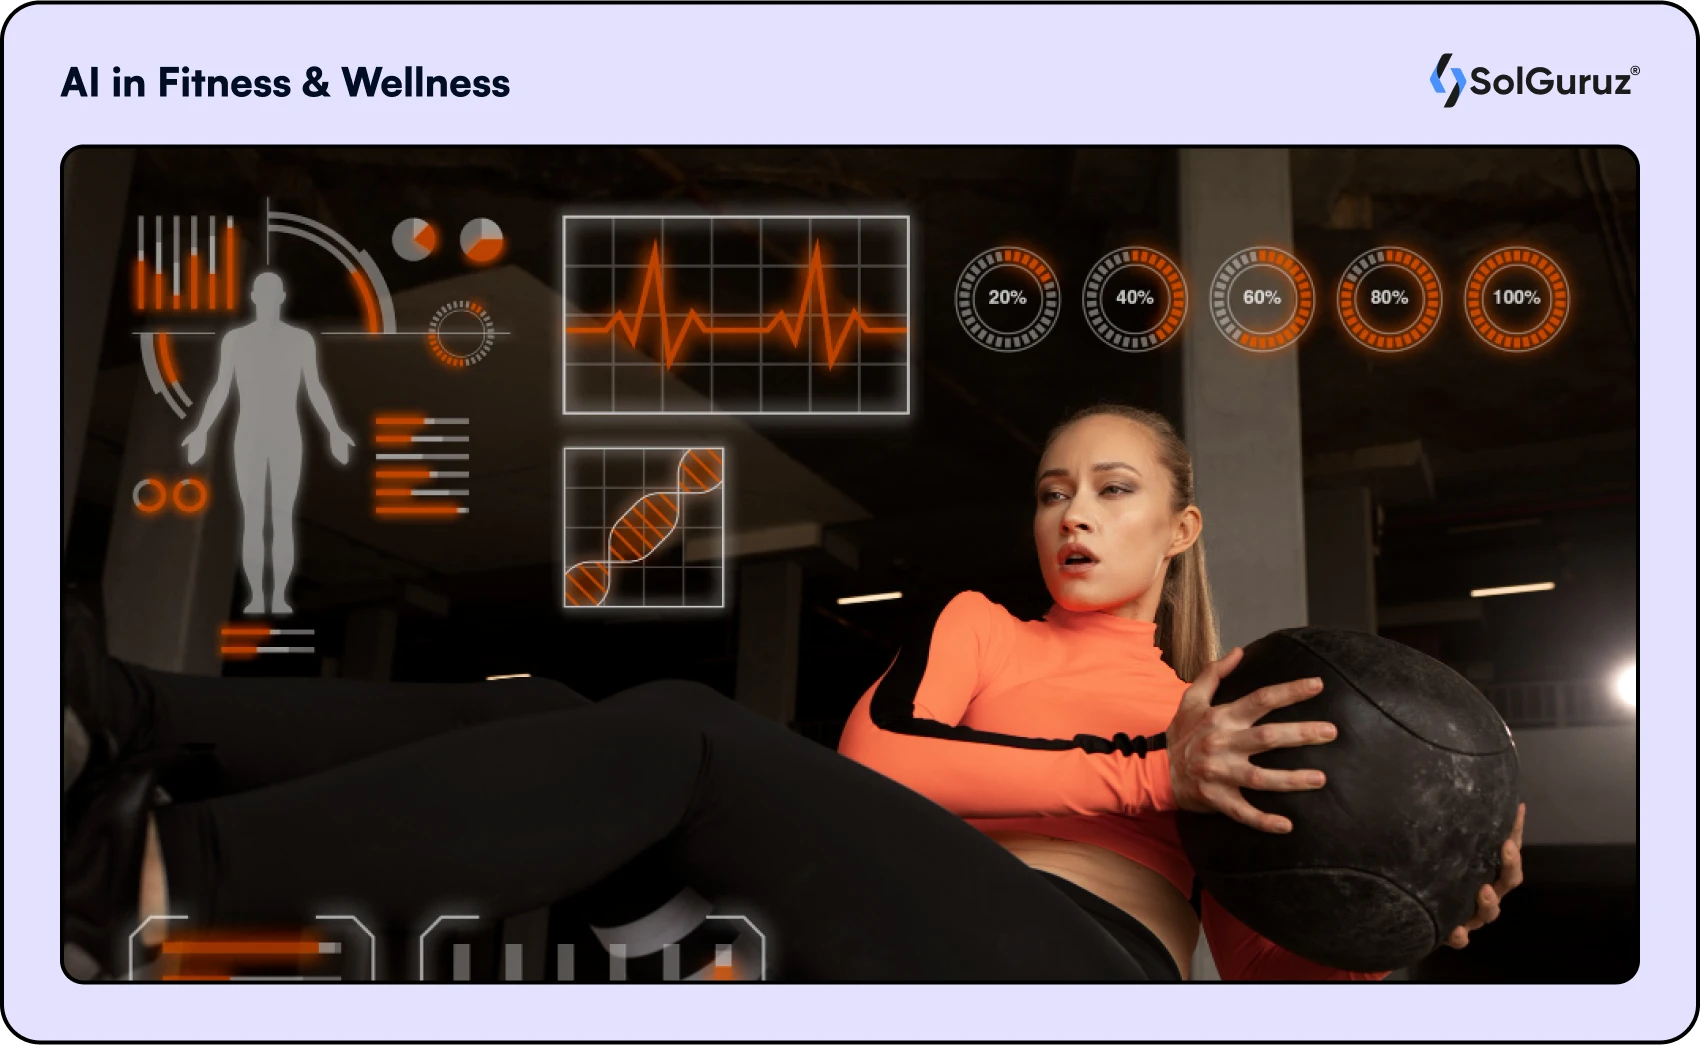 AI use cases and applications in Fitness and Wellness industry